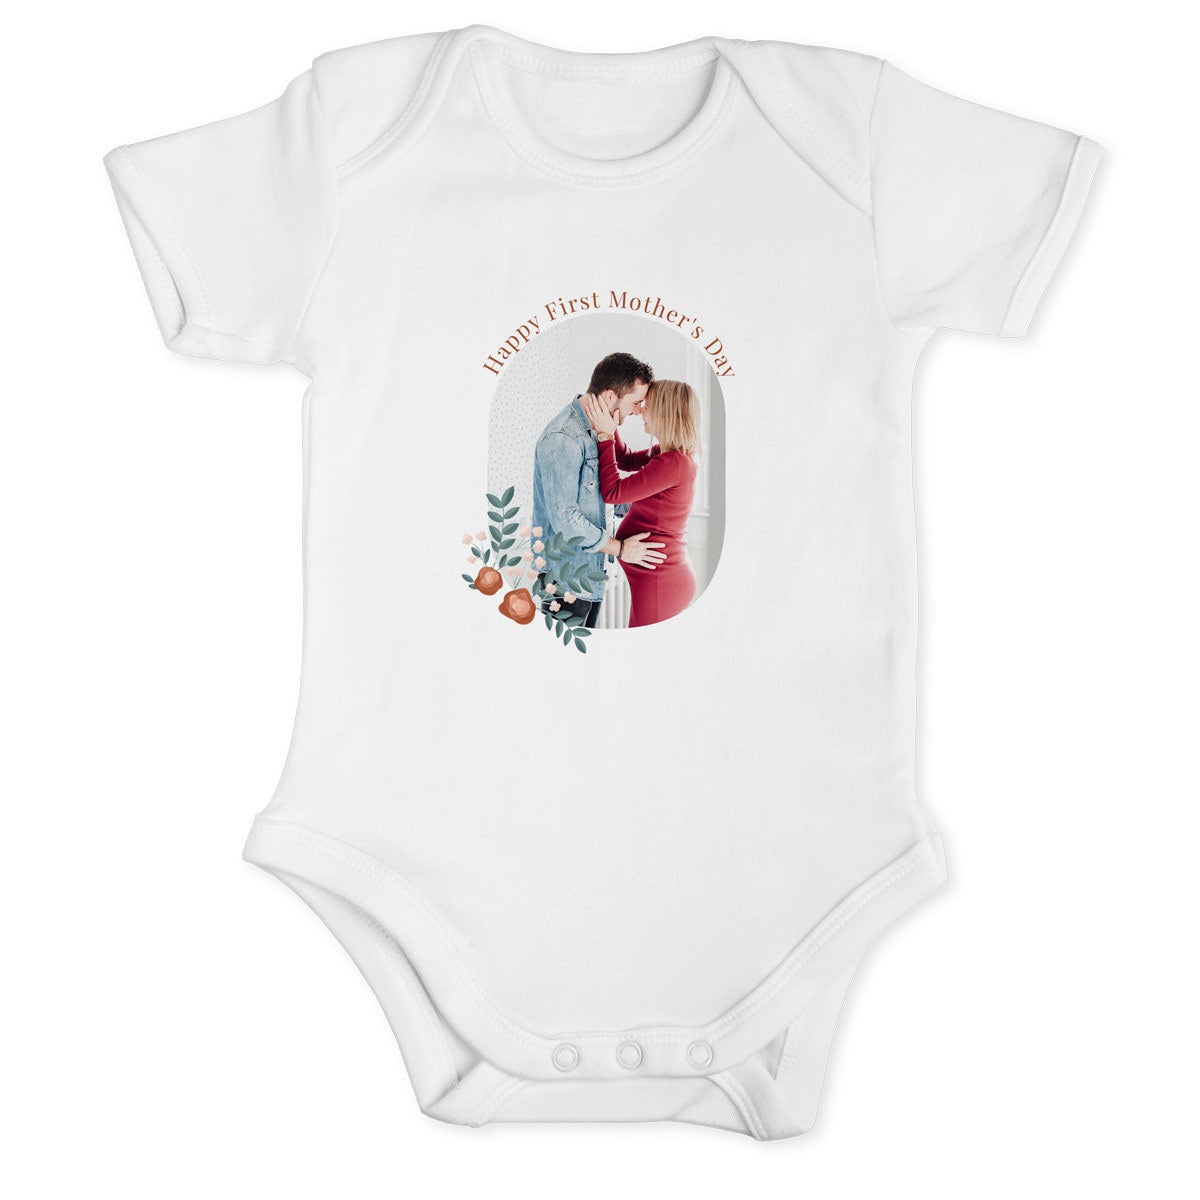 Personalised baby babygrow - My first Mother's Day - White - 50/56